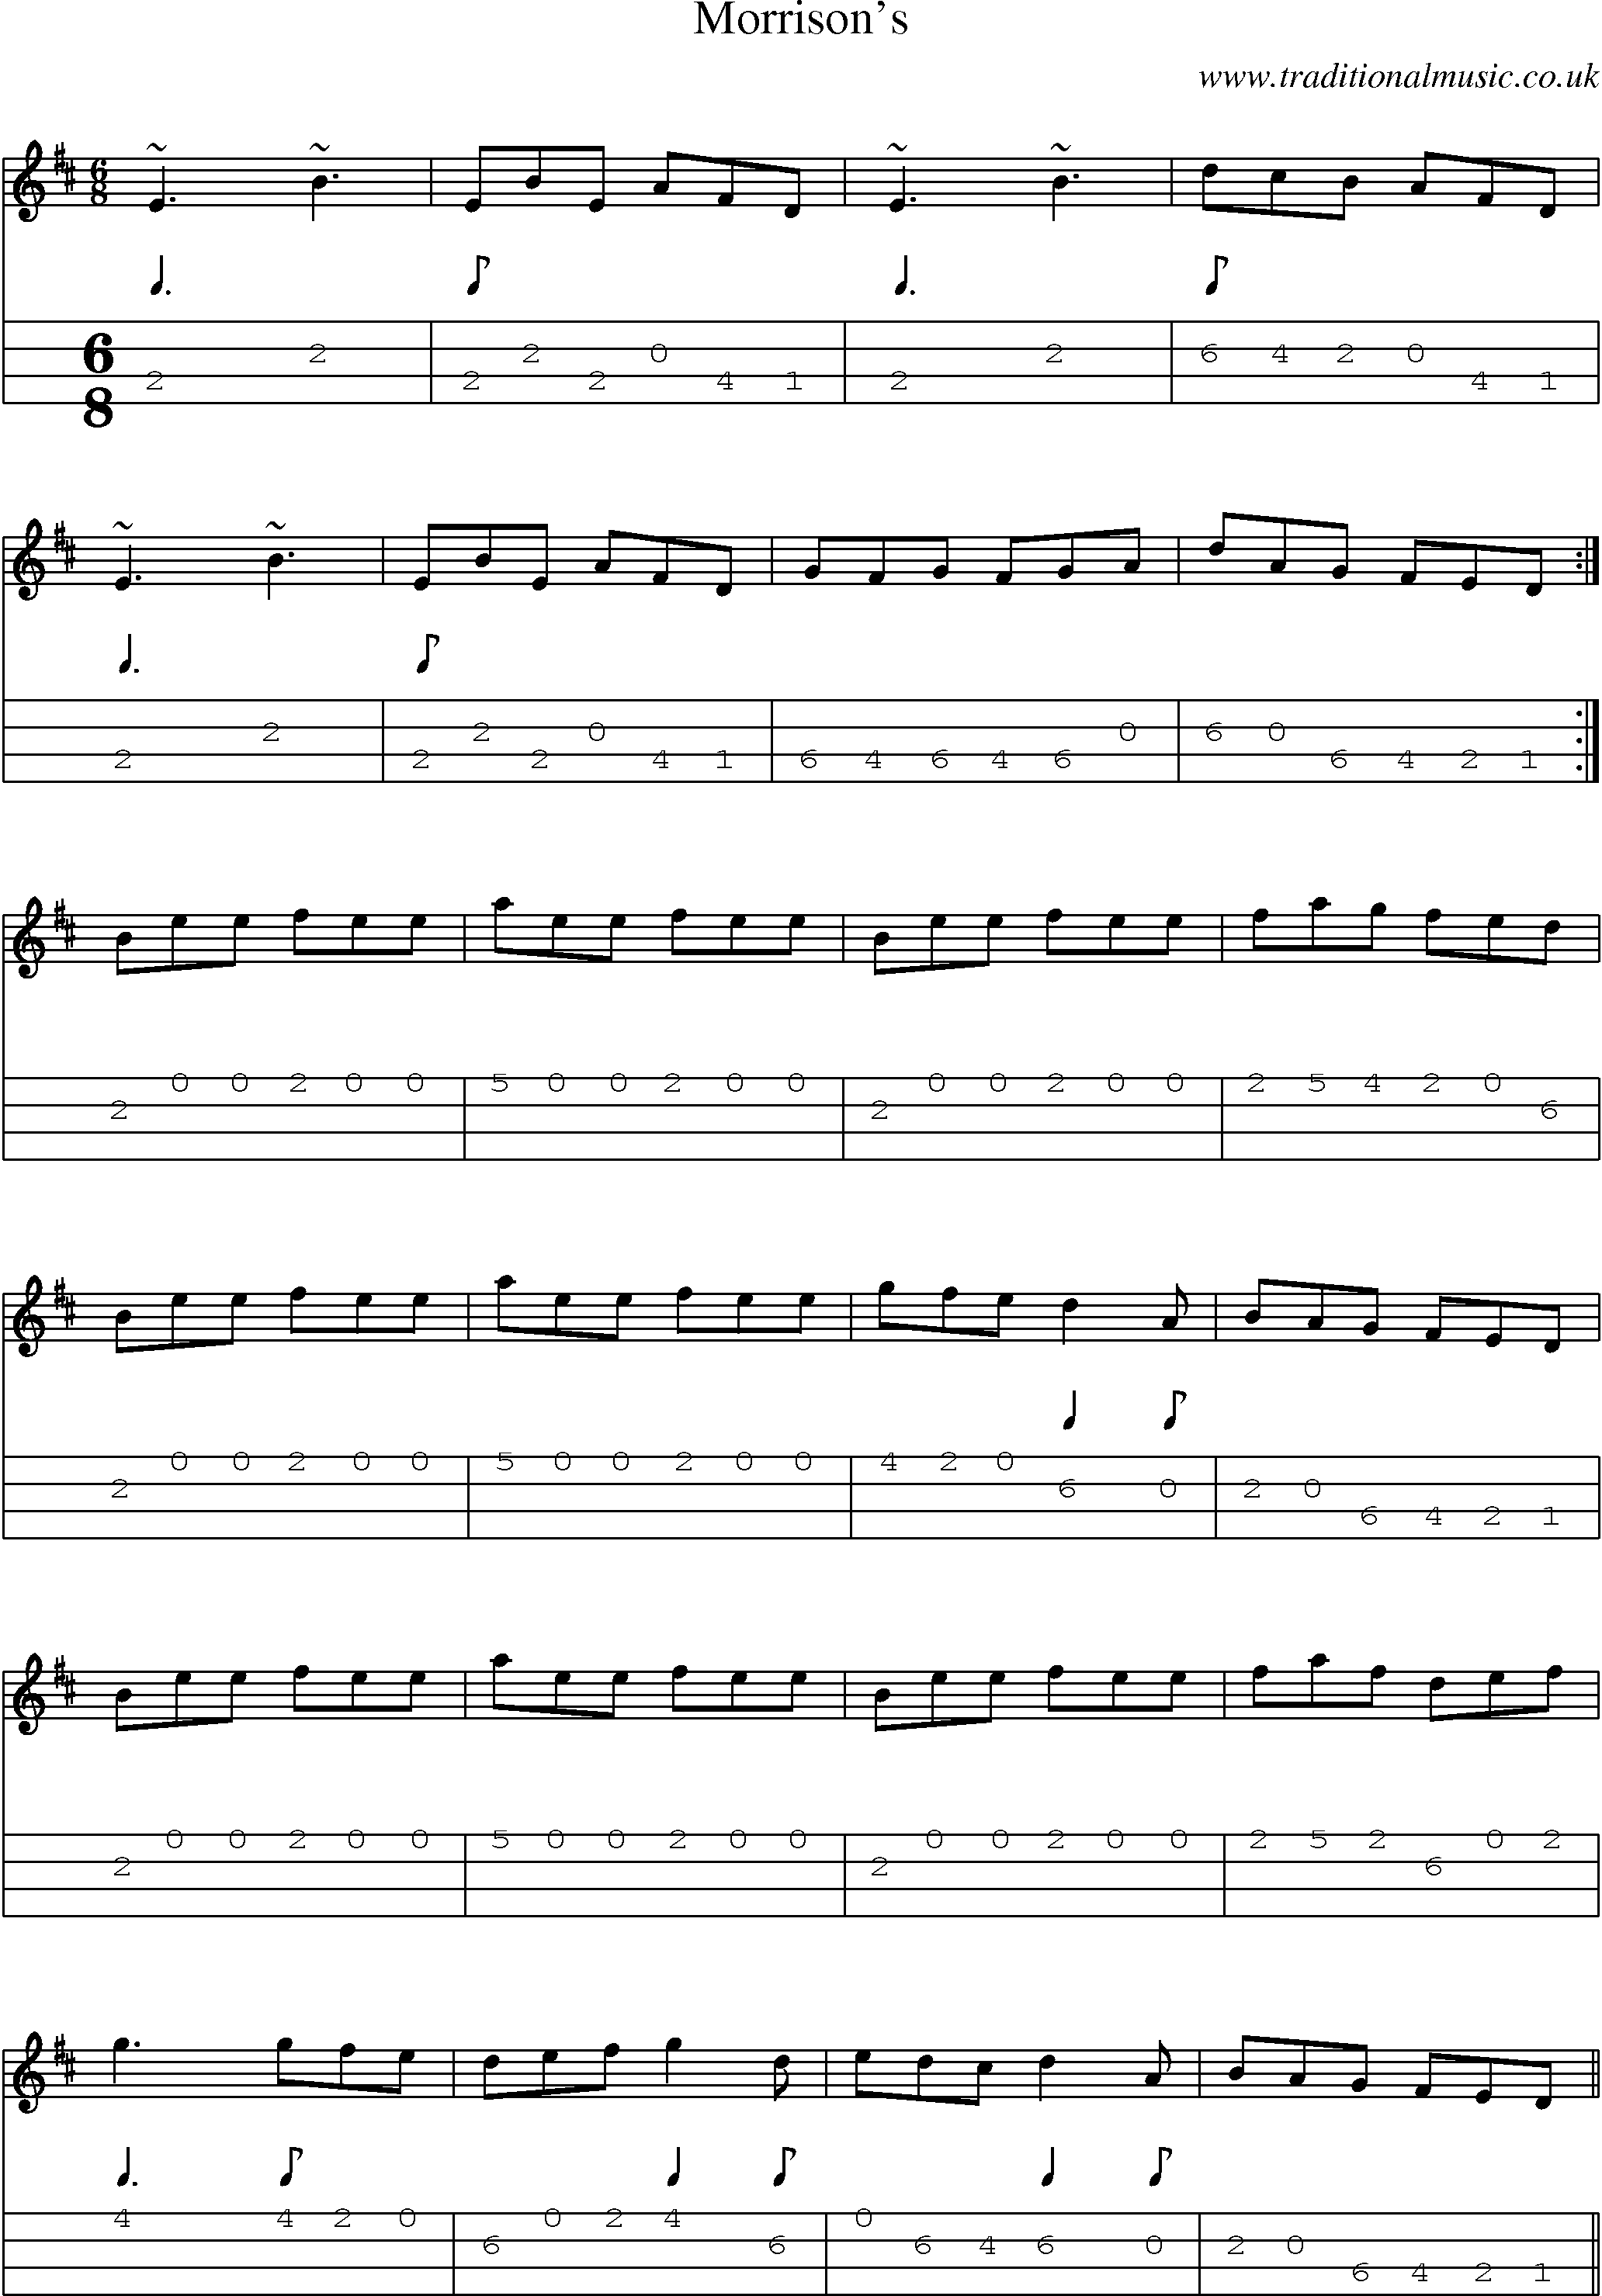 Music Score and Mandolin Tabs for Morrisons